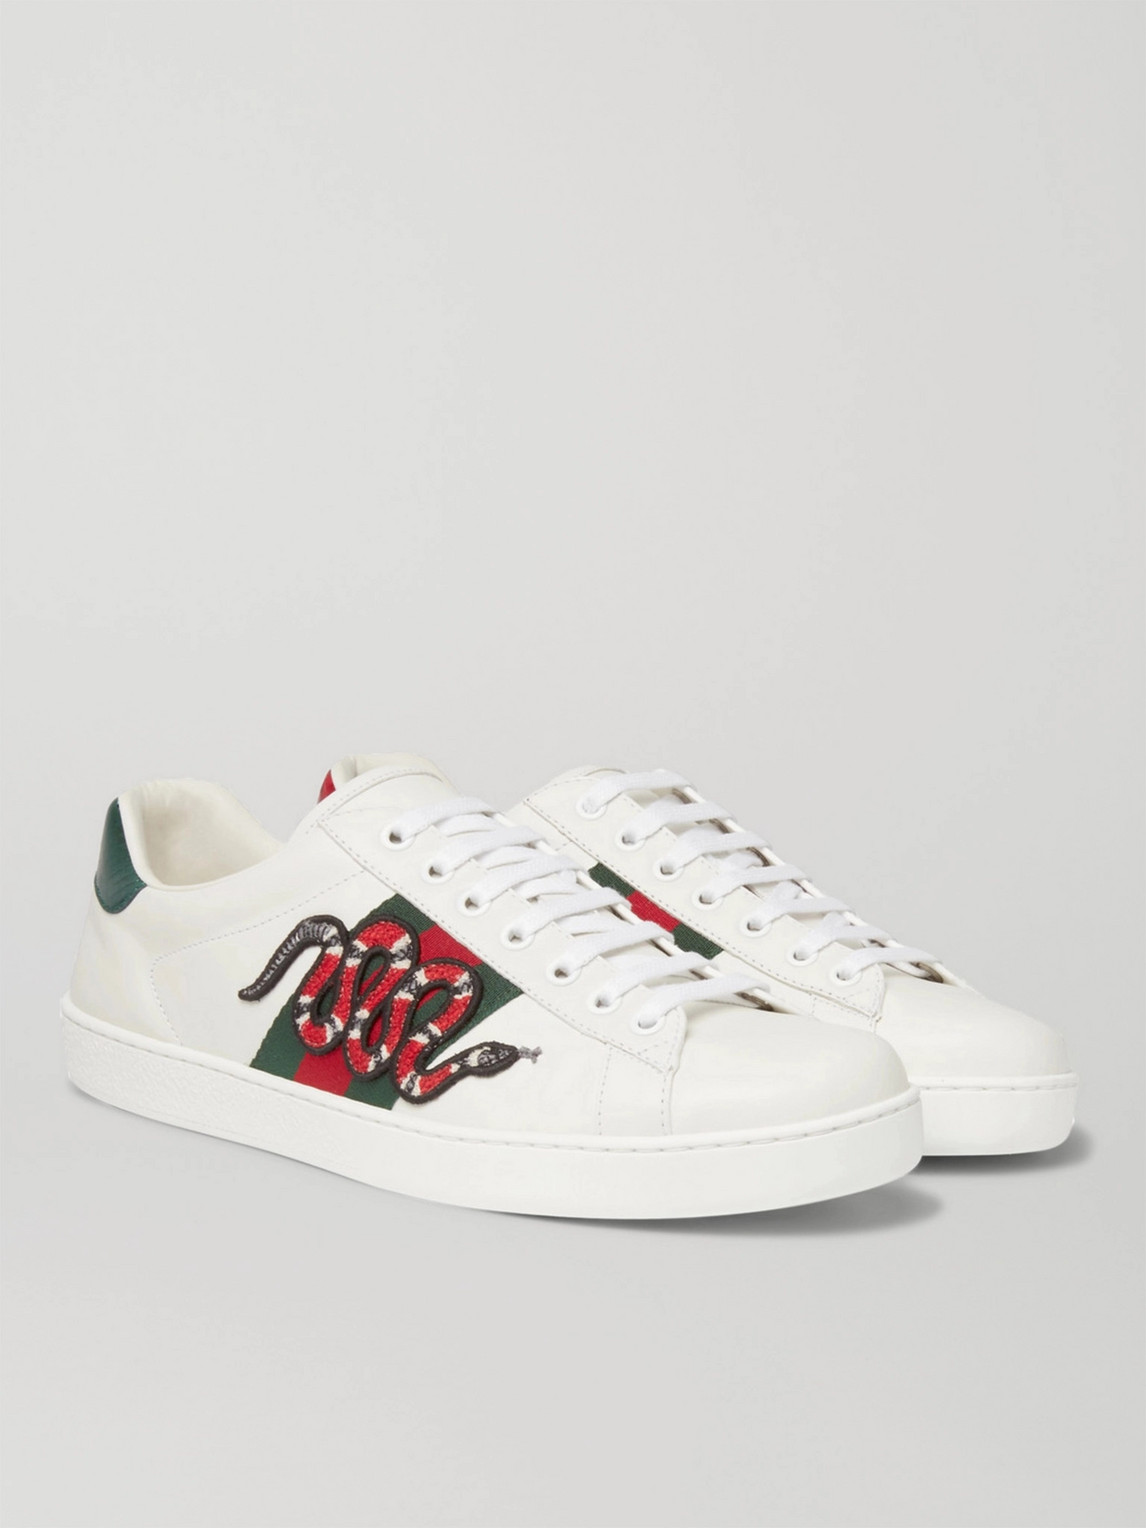 gucci snake embroidered sneakers